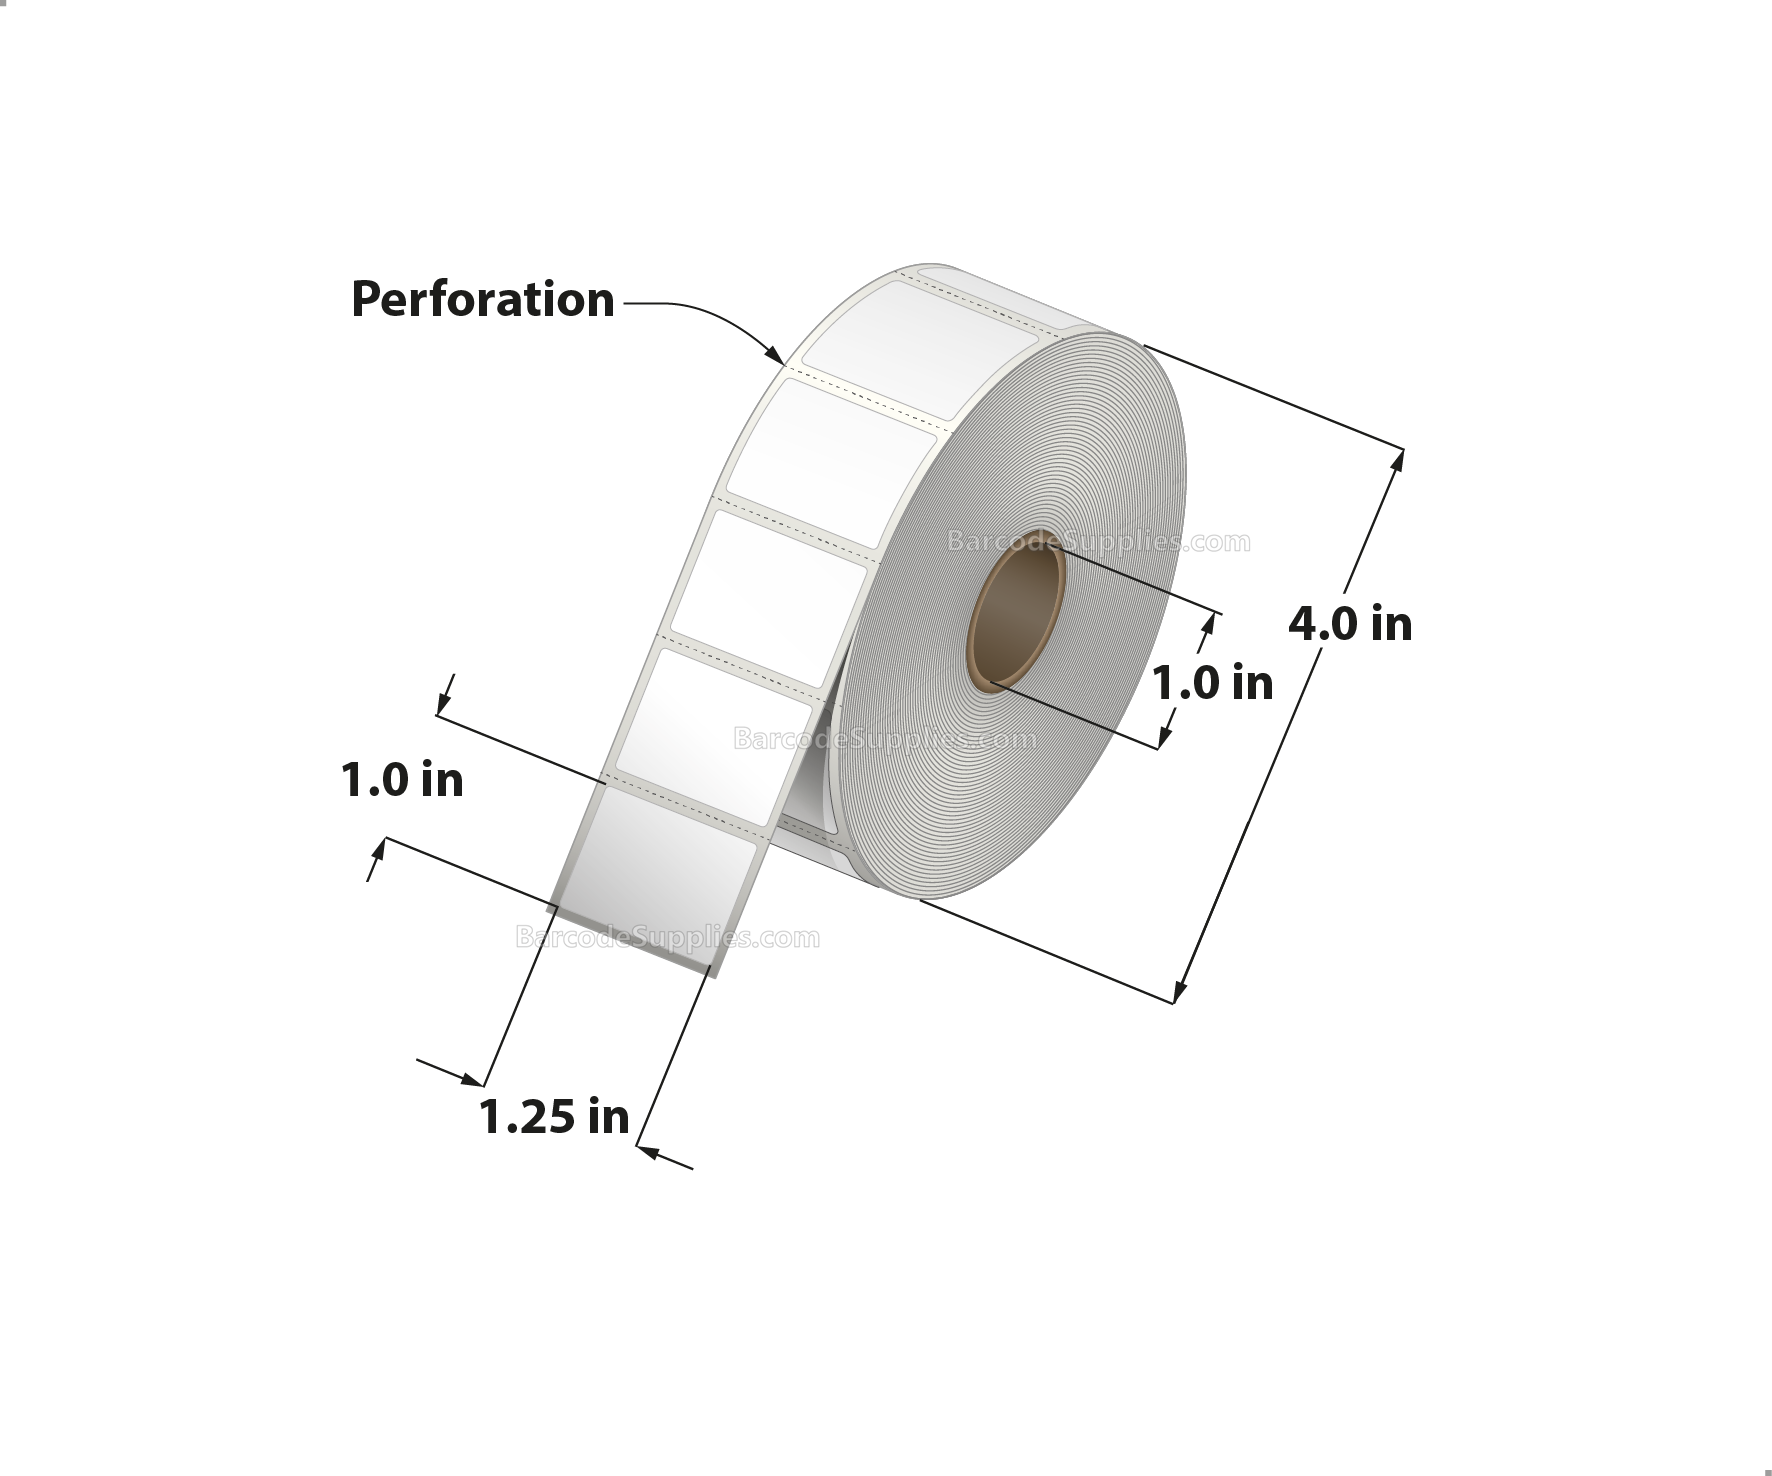 1.25 x 1 Direct Thermal White Labels With Rubber Adhesive - Perforated - 1380 Labels Per Roll - Carton Of 12 Rolls - 16560 Labels Total - MPN: RDT4-125100-1P